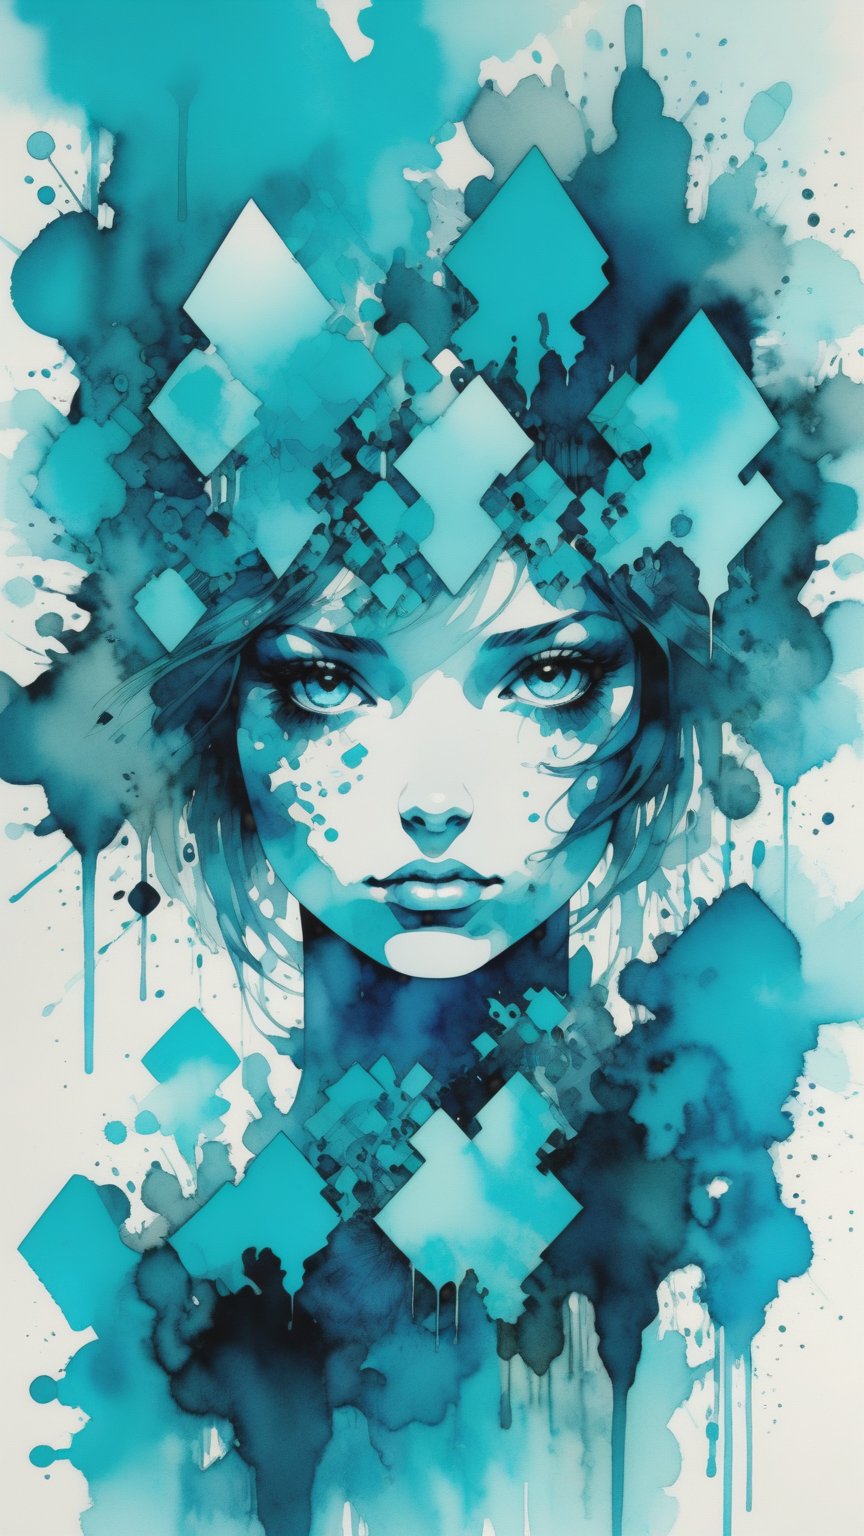 Beautiful Girl in the style of cyan and blue,  inkblots,  made of crystals,  juxtapositions extraordinaire,  geometric animal figures,  ink and wash,  redshift